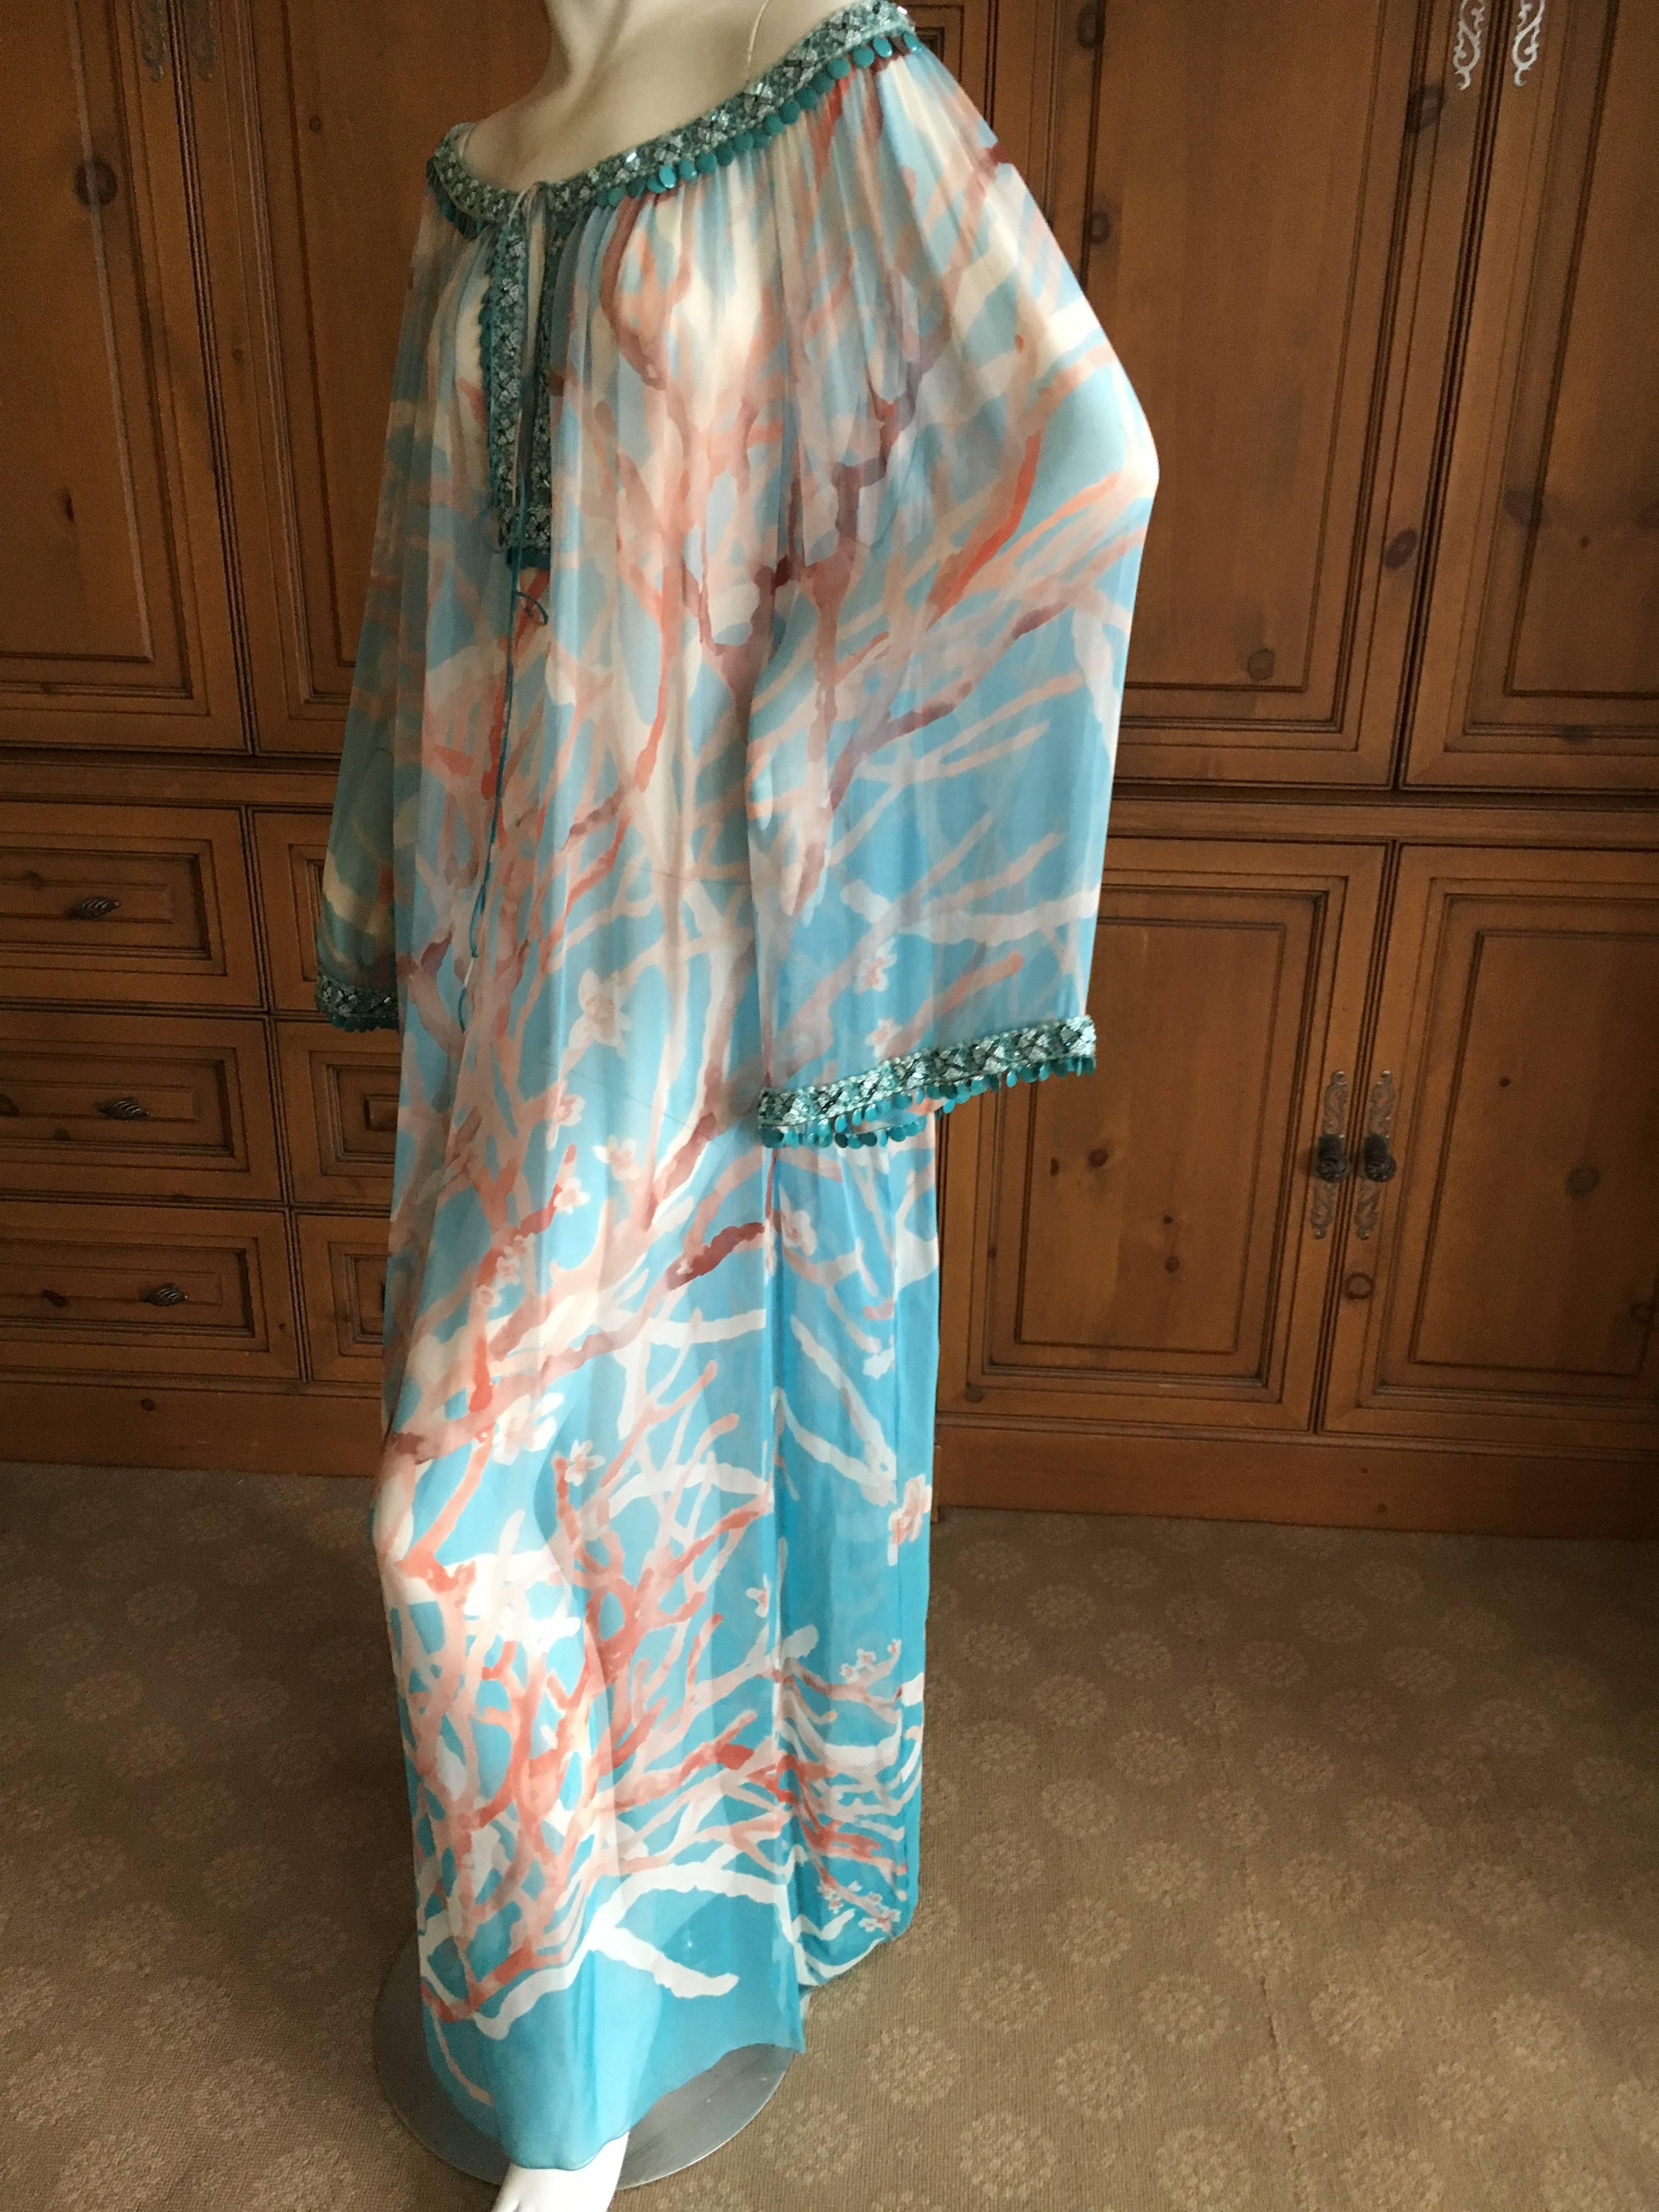 Oscar de la Renta Turquoise Bead Embellished Apple Blossom Caftan In New Condition For Sale In Cloverdale, CA